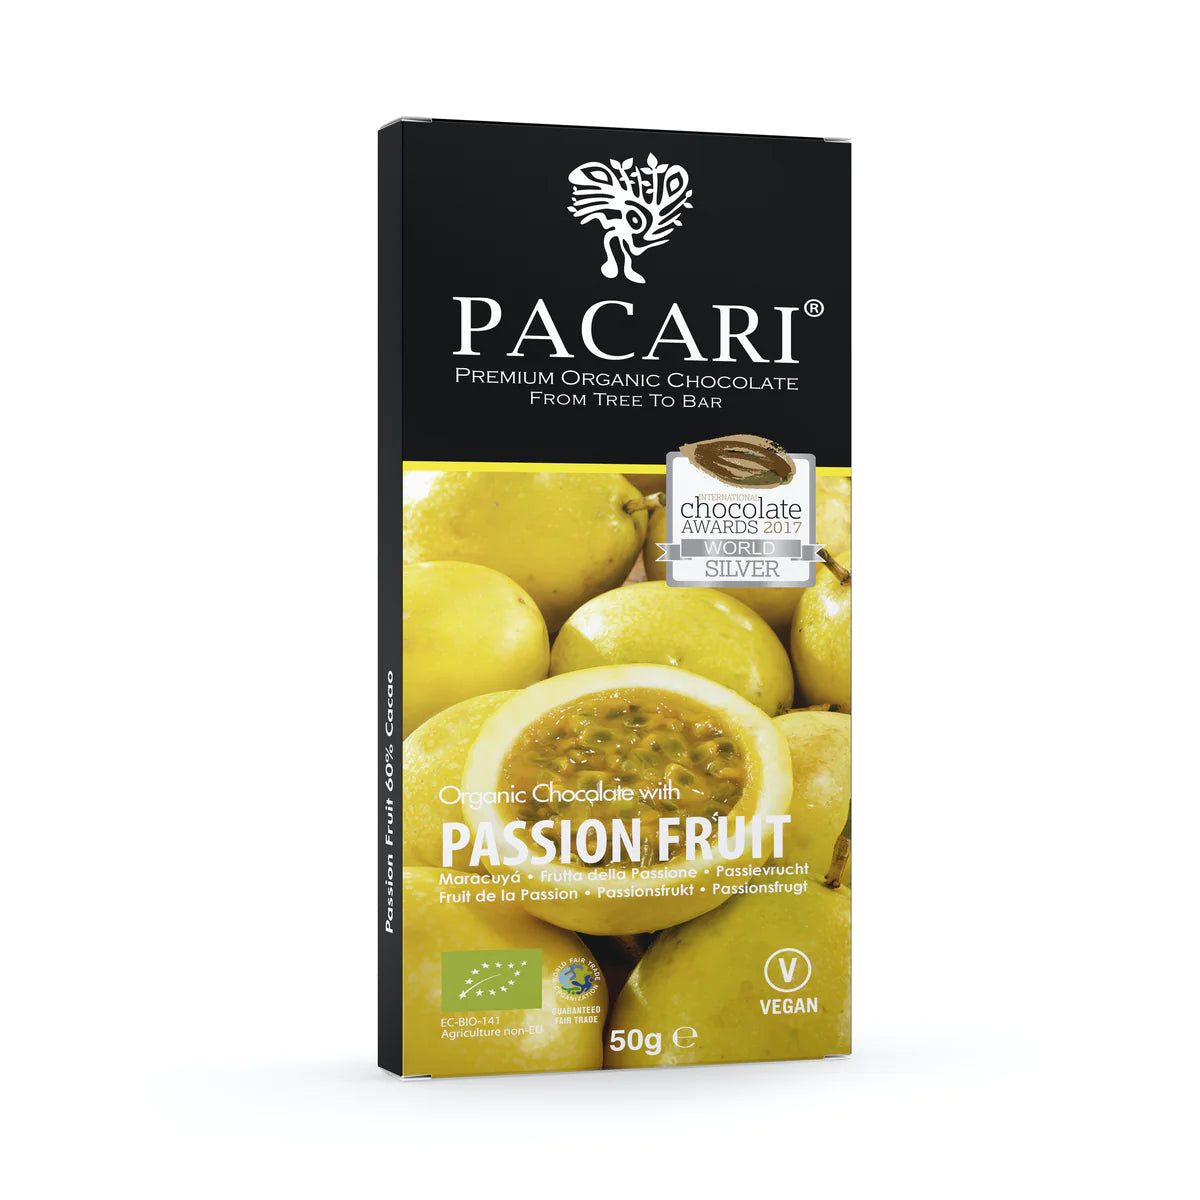 Organic Chocolate Bar with Passion Fruit by Pacari, 50 g